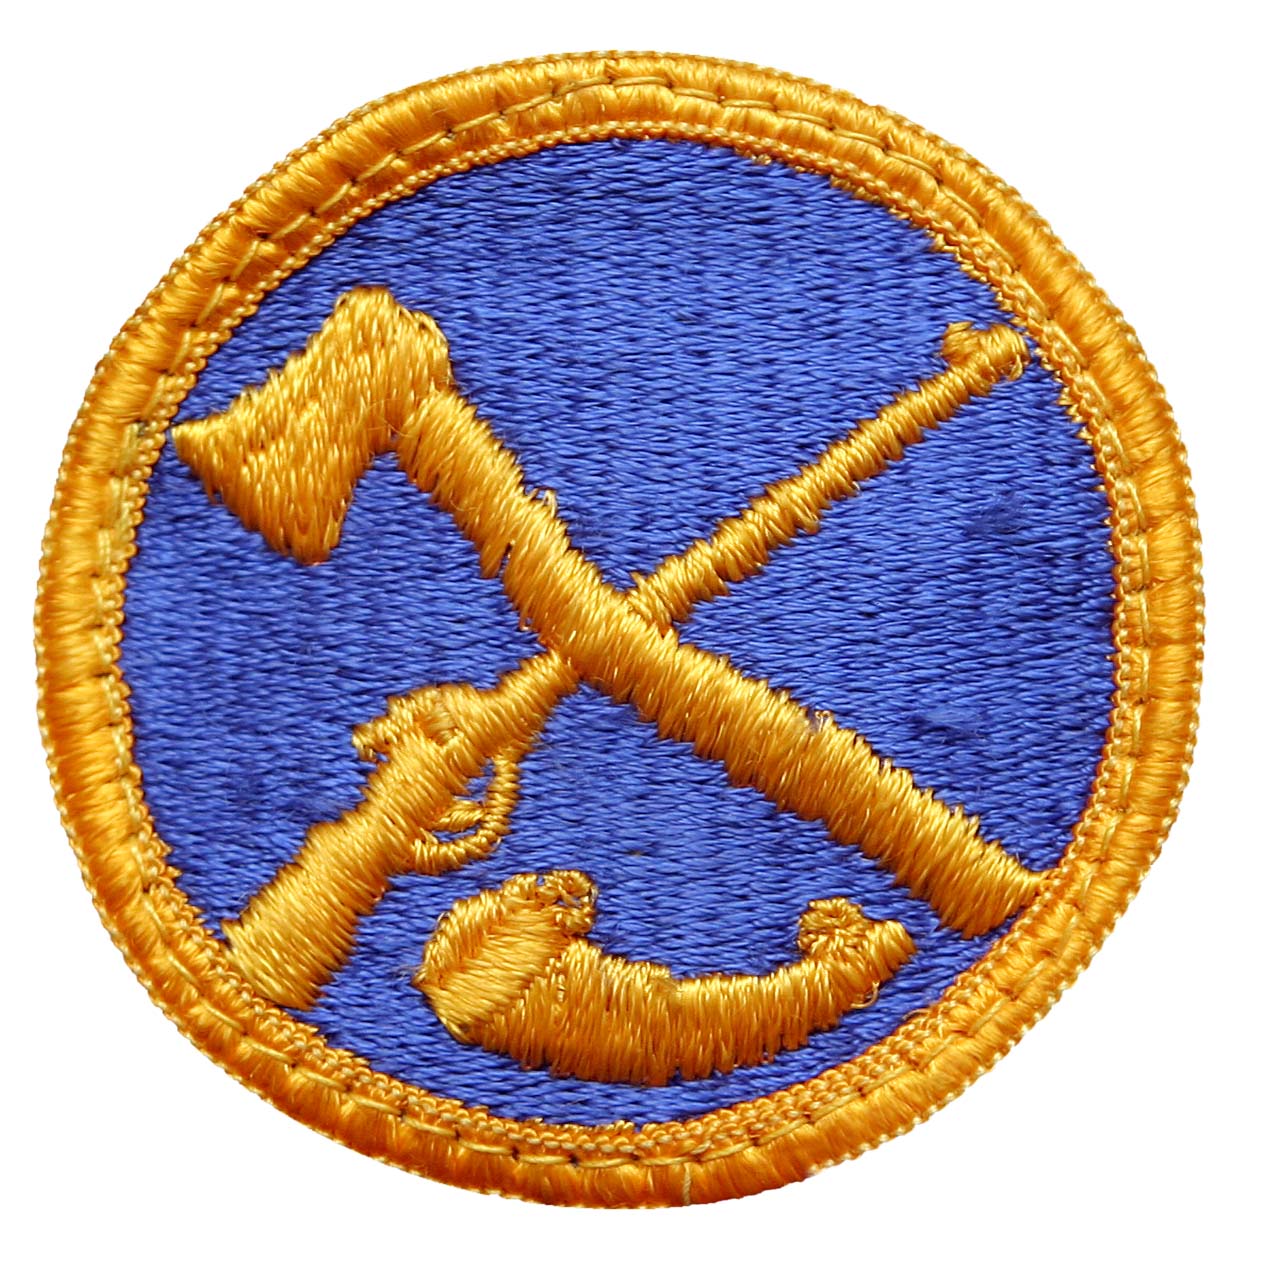 WVNG patch